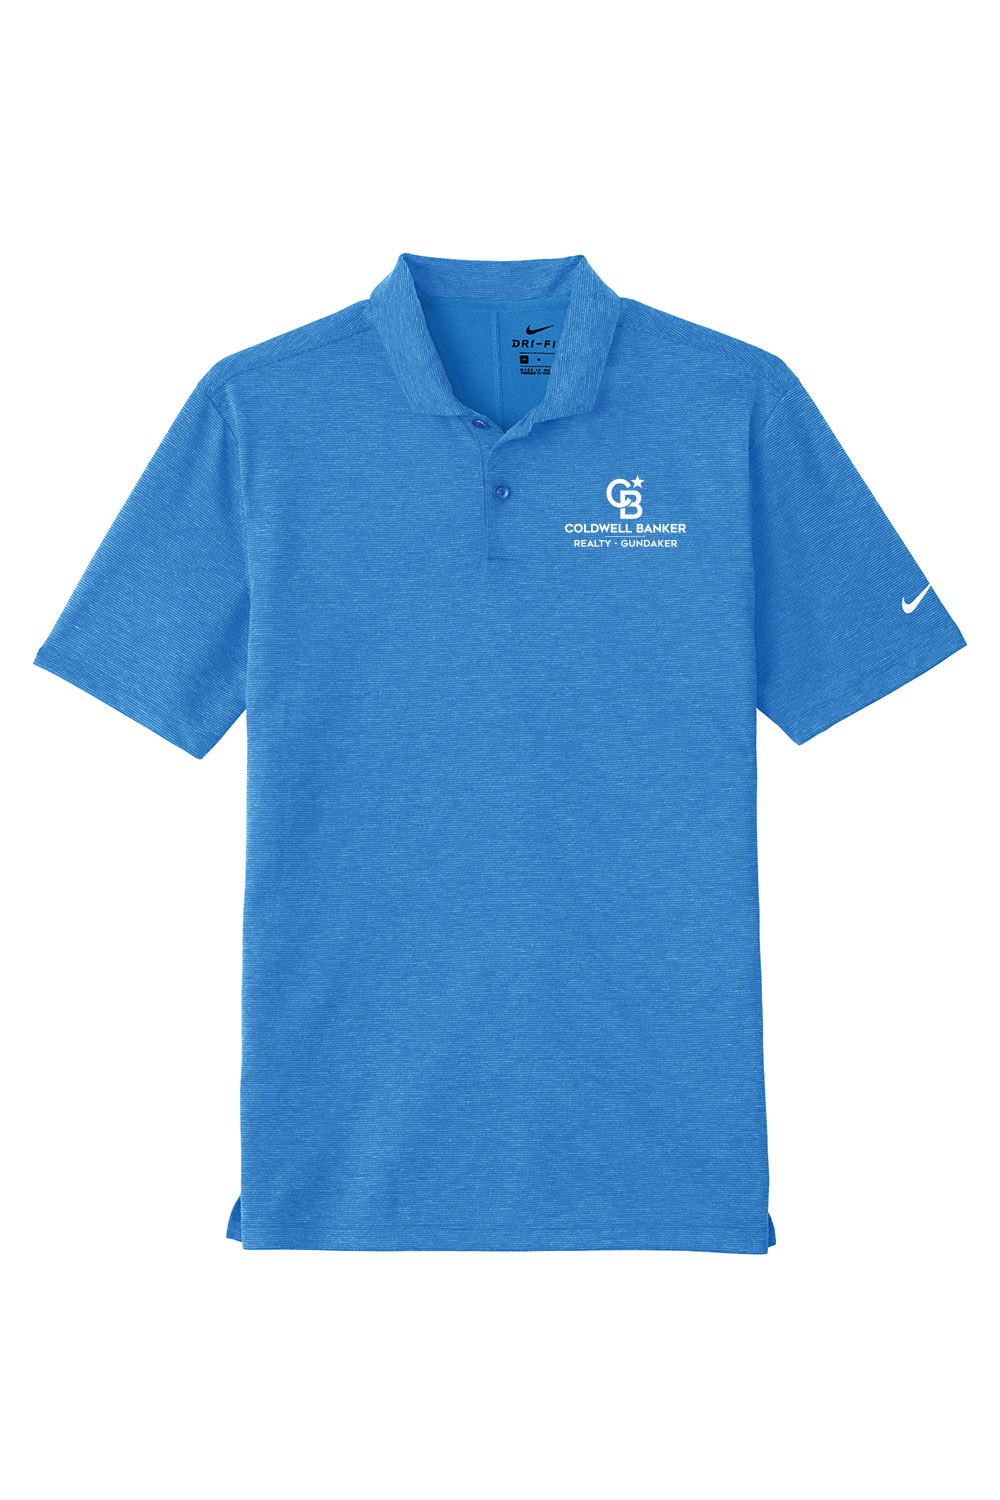 Nike Dri-Fit Prime Polo – Coldwell Banker Gundaker Promotional Products